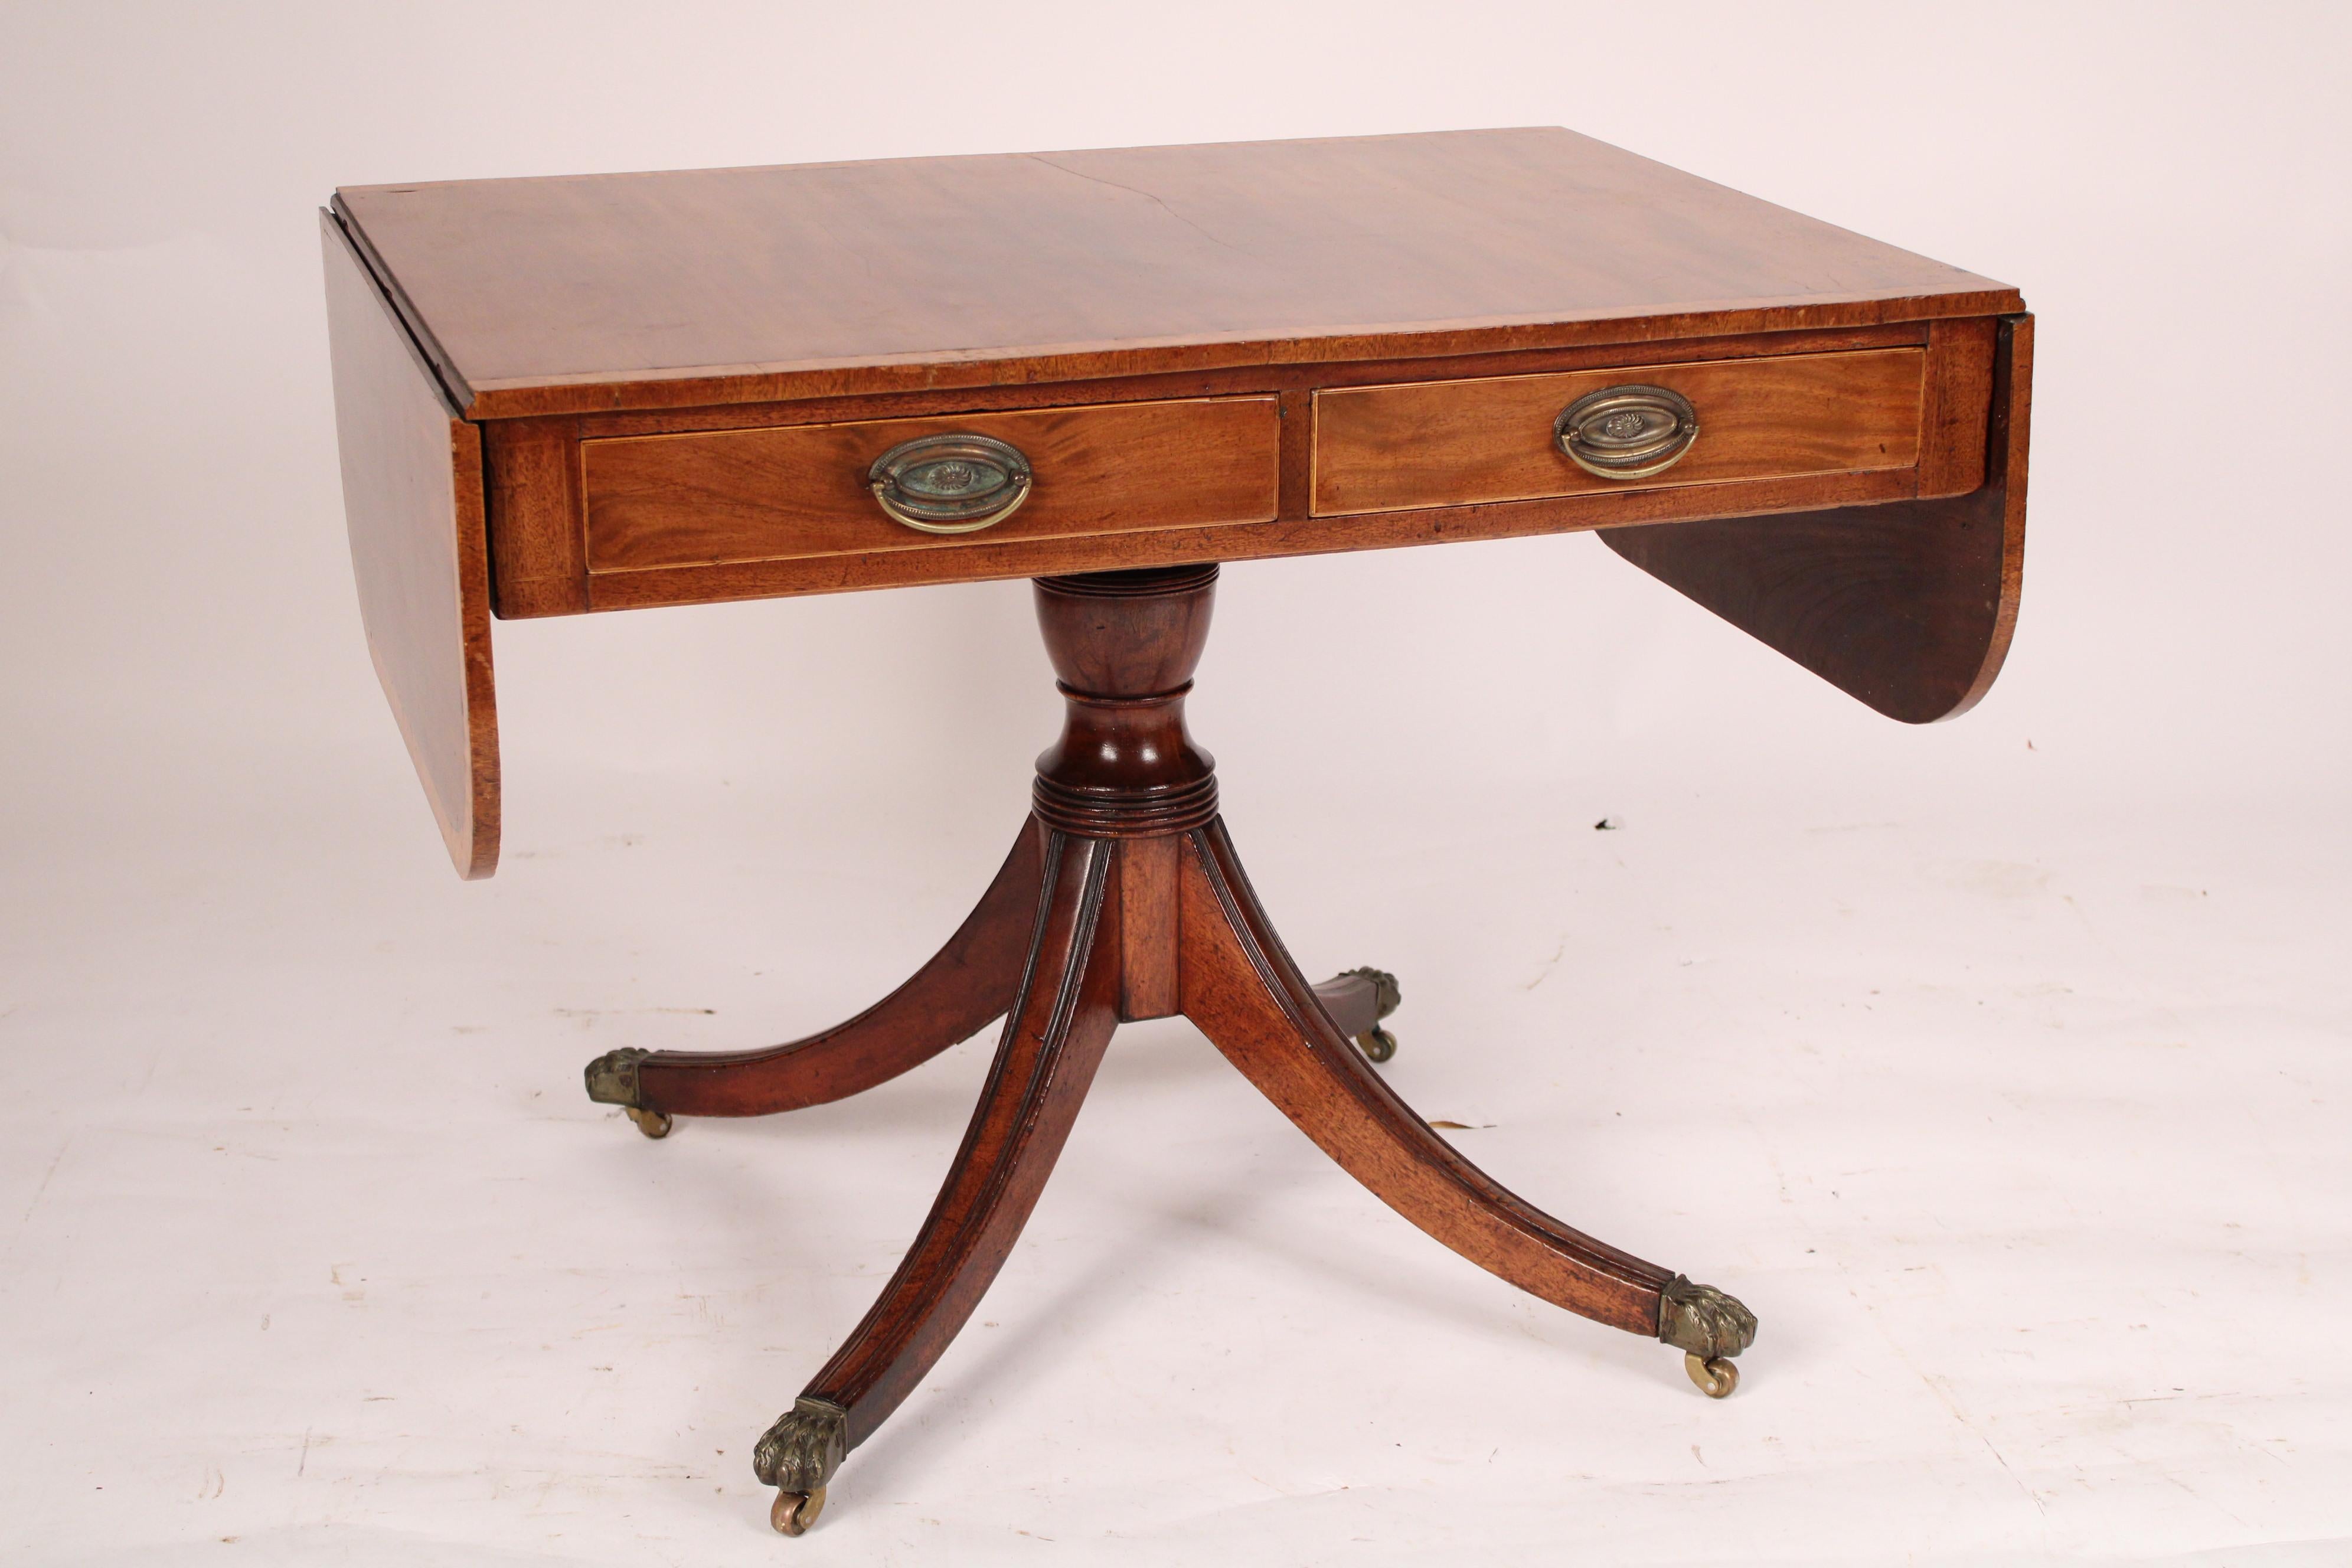 English regency mahogany sofa table, early 19th century. With a mahogany top with burl ash crossbanding and two D shaped drop leaves on either end, two frieze drawers on the front side with string inlay, the back side with string inlay, a baluster